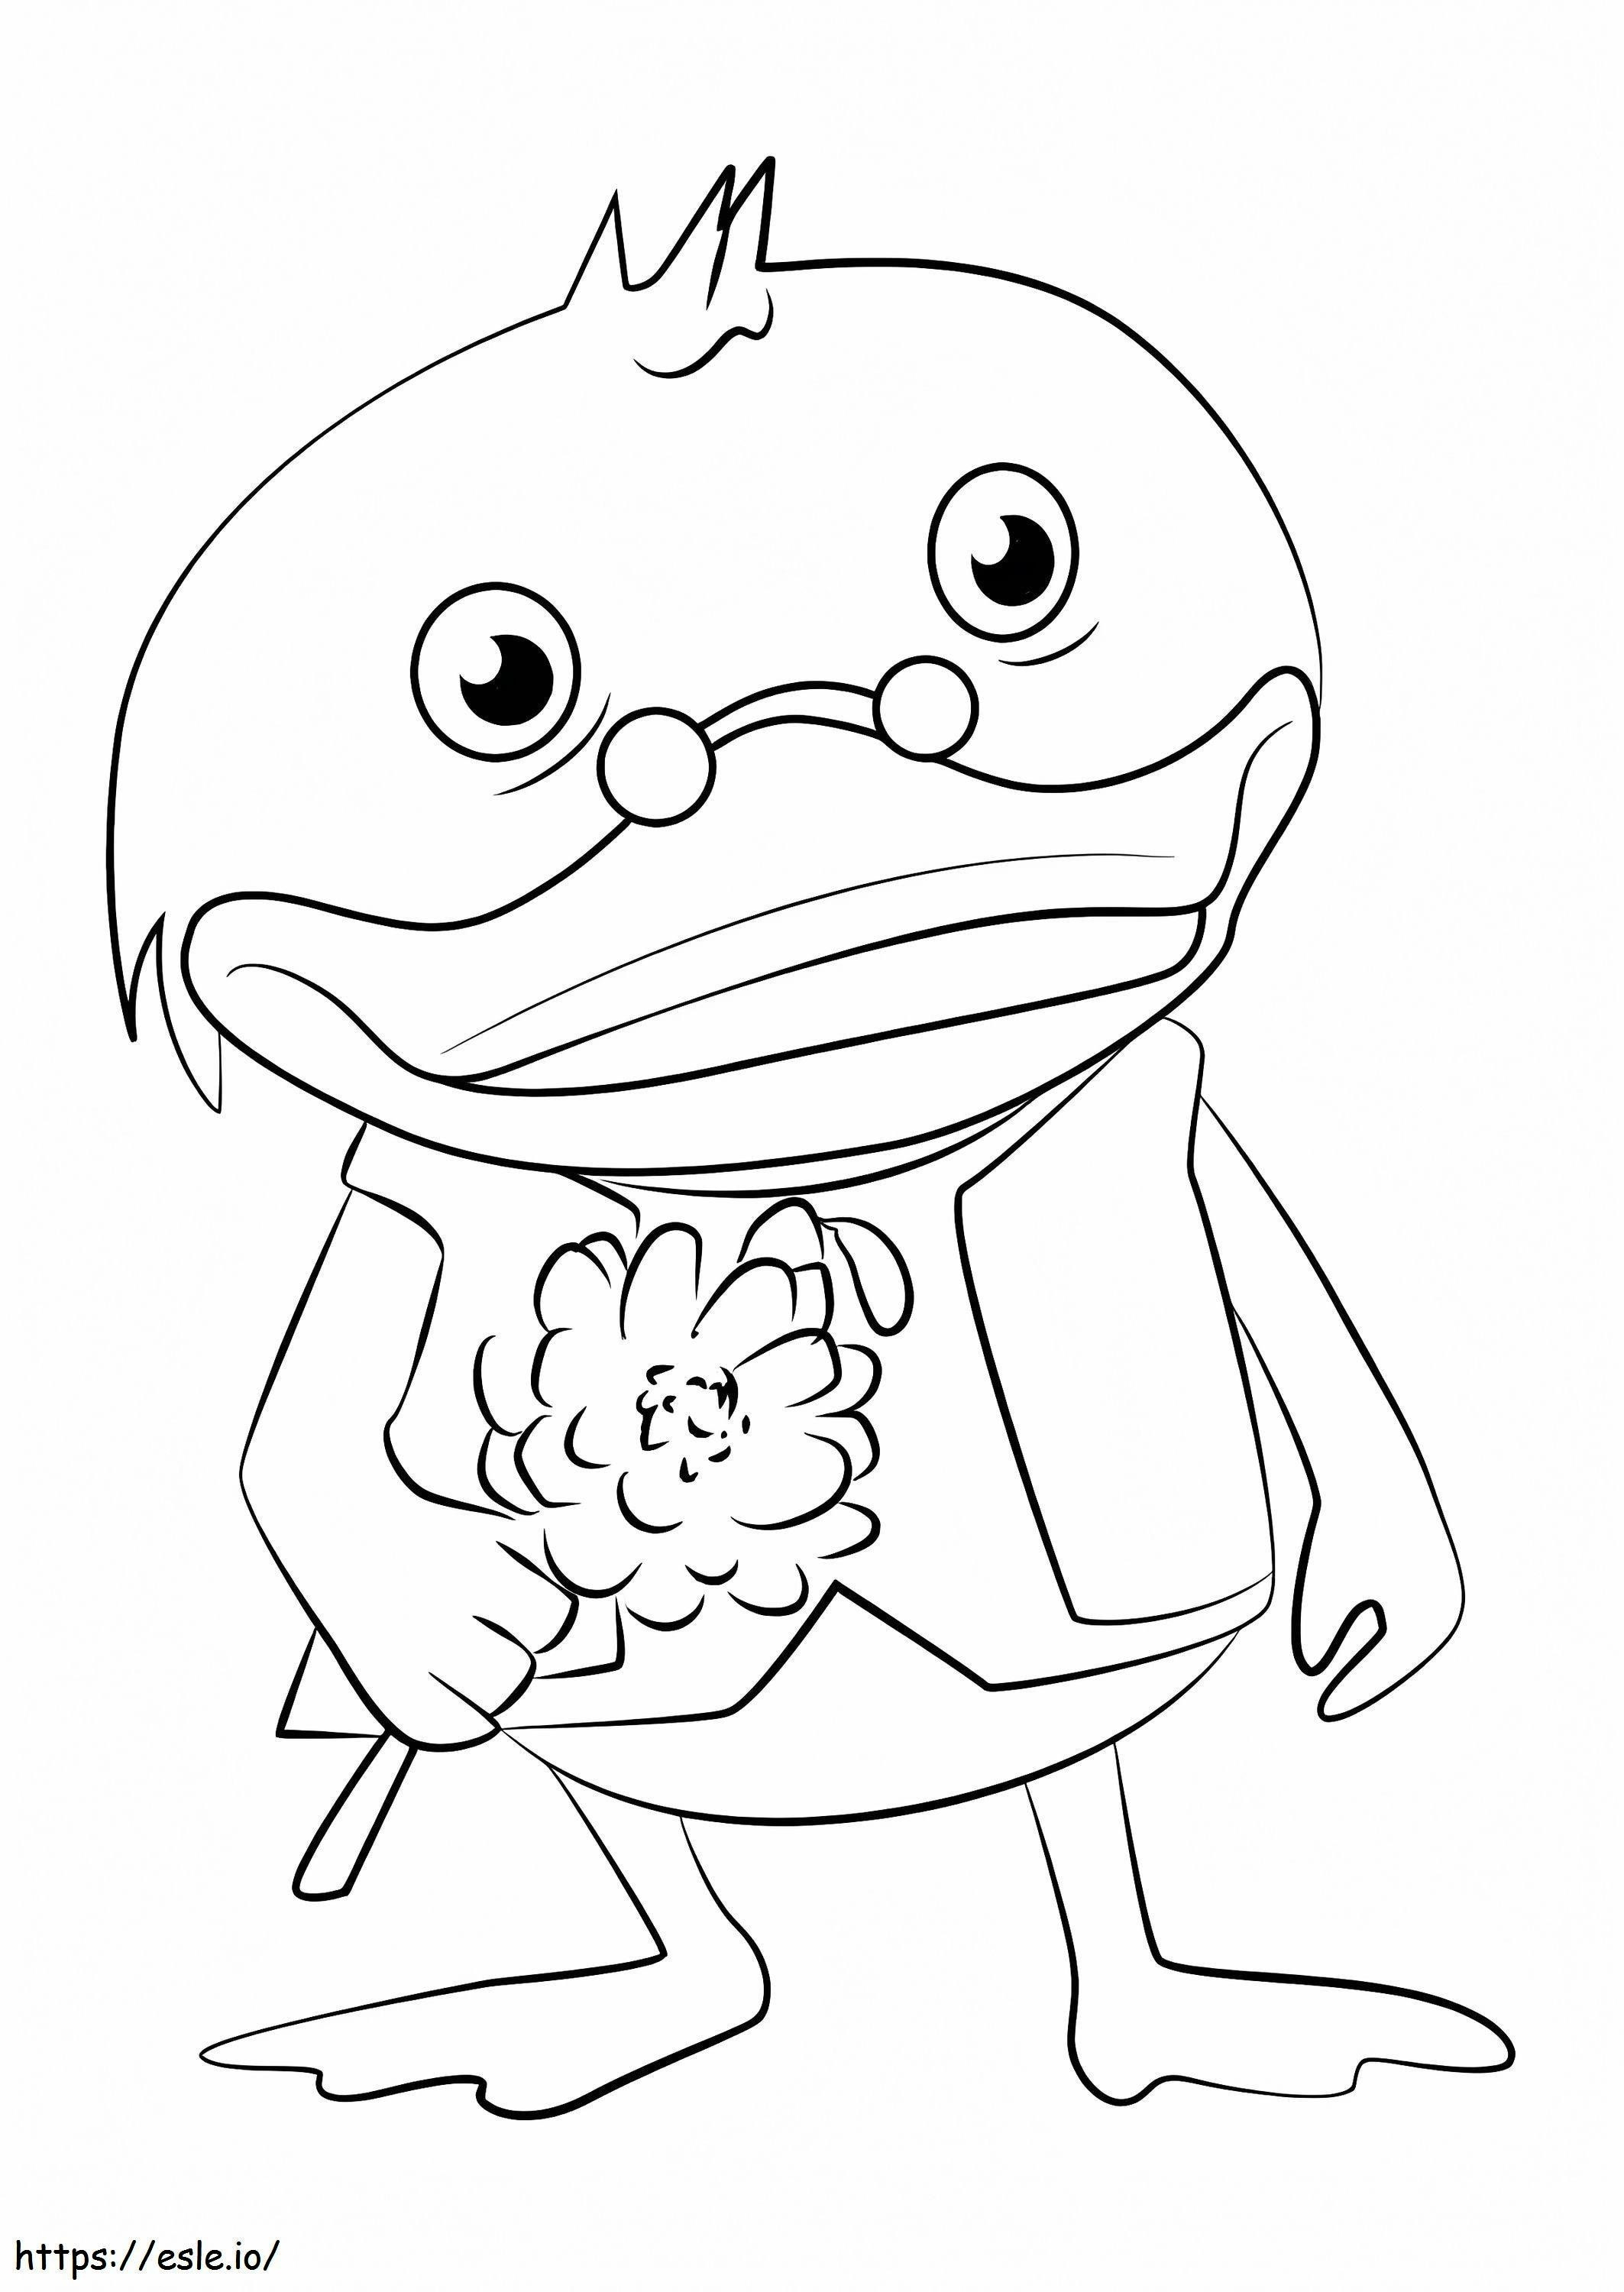 Doc Quackers coloring page